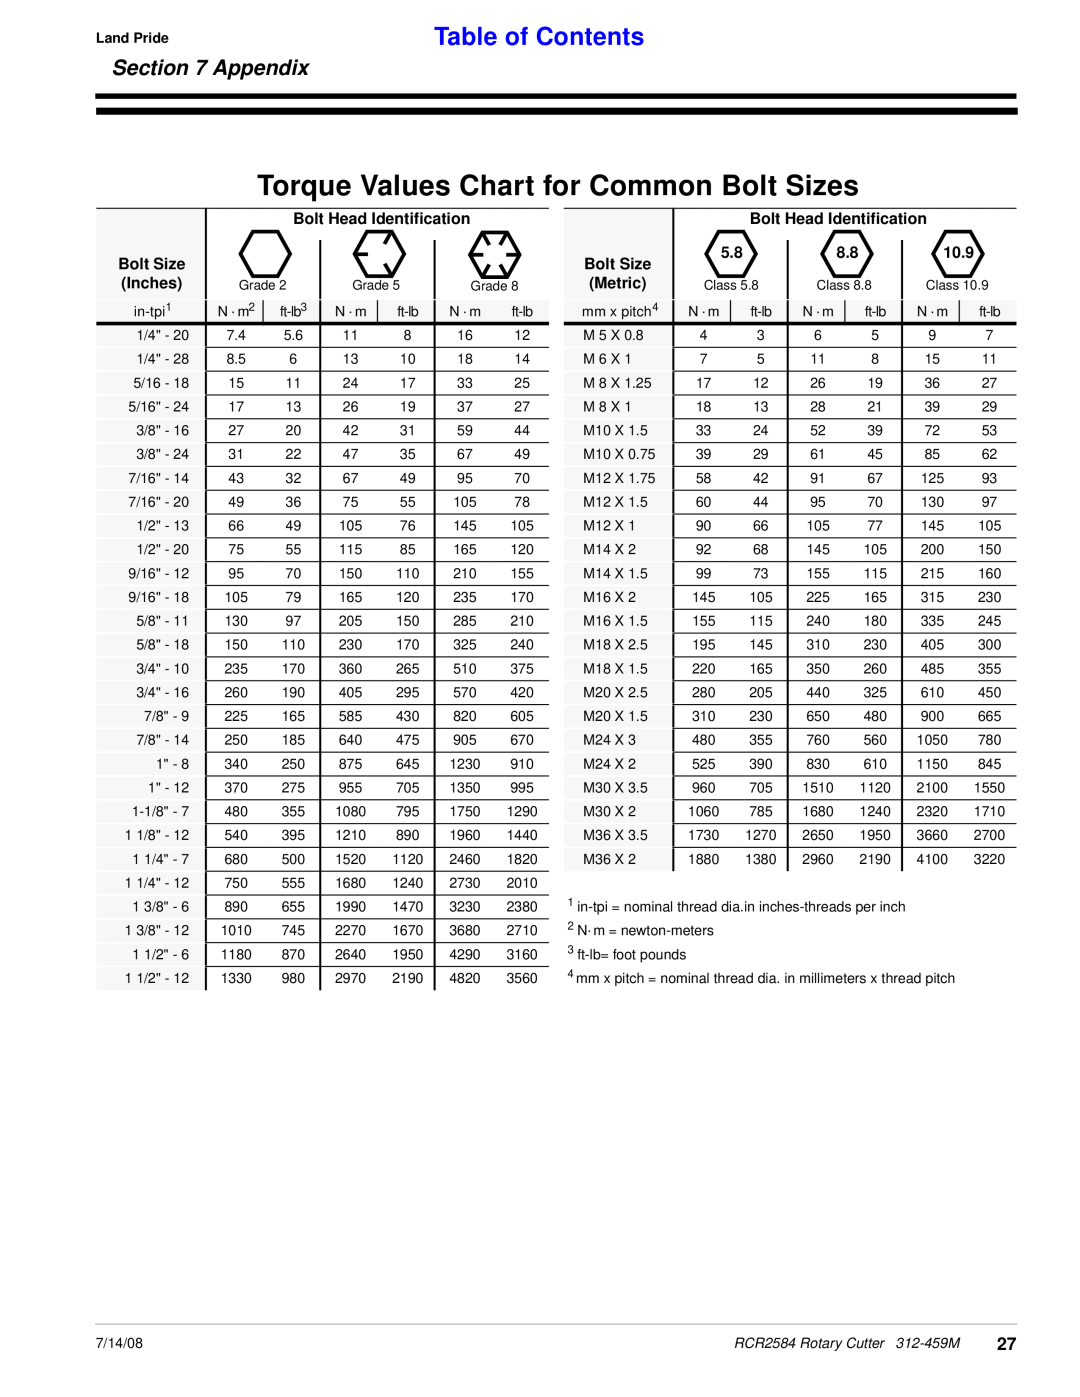 Land Pride RCR2584 manual Torque Values Chart for Common Bolt Sizes, Appendix, Table of Contents, Land Pride 